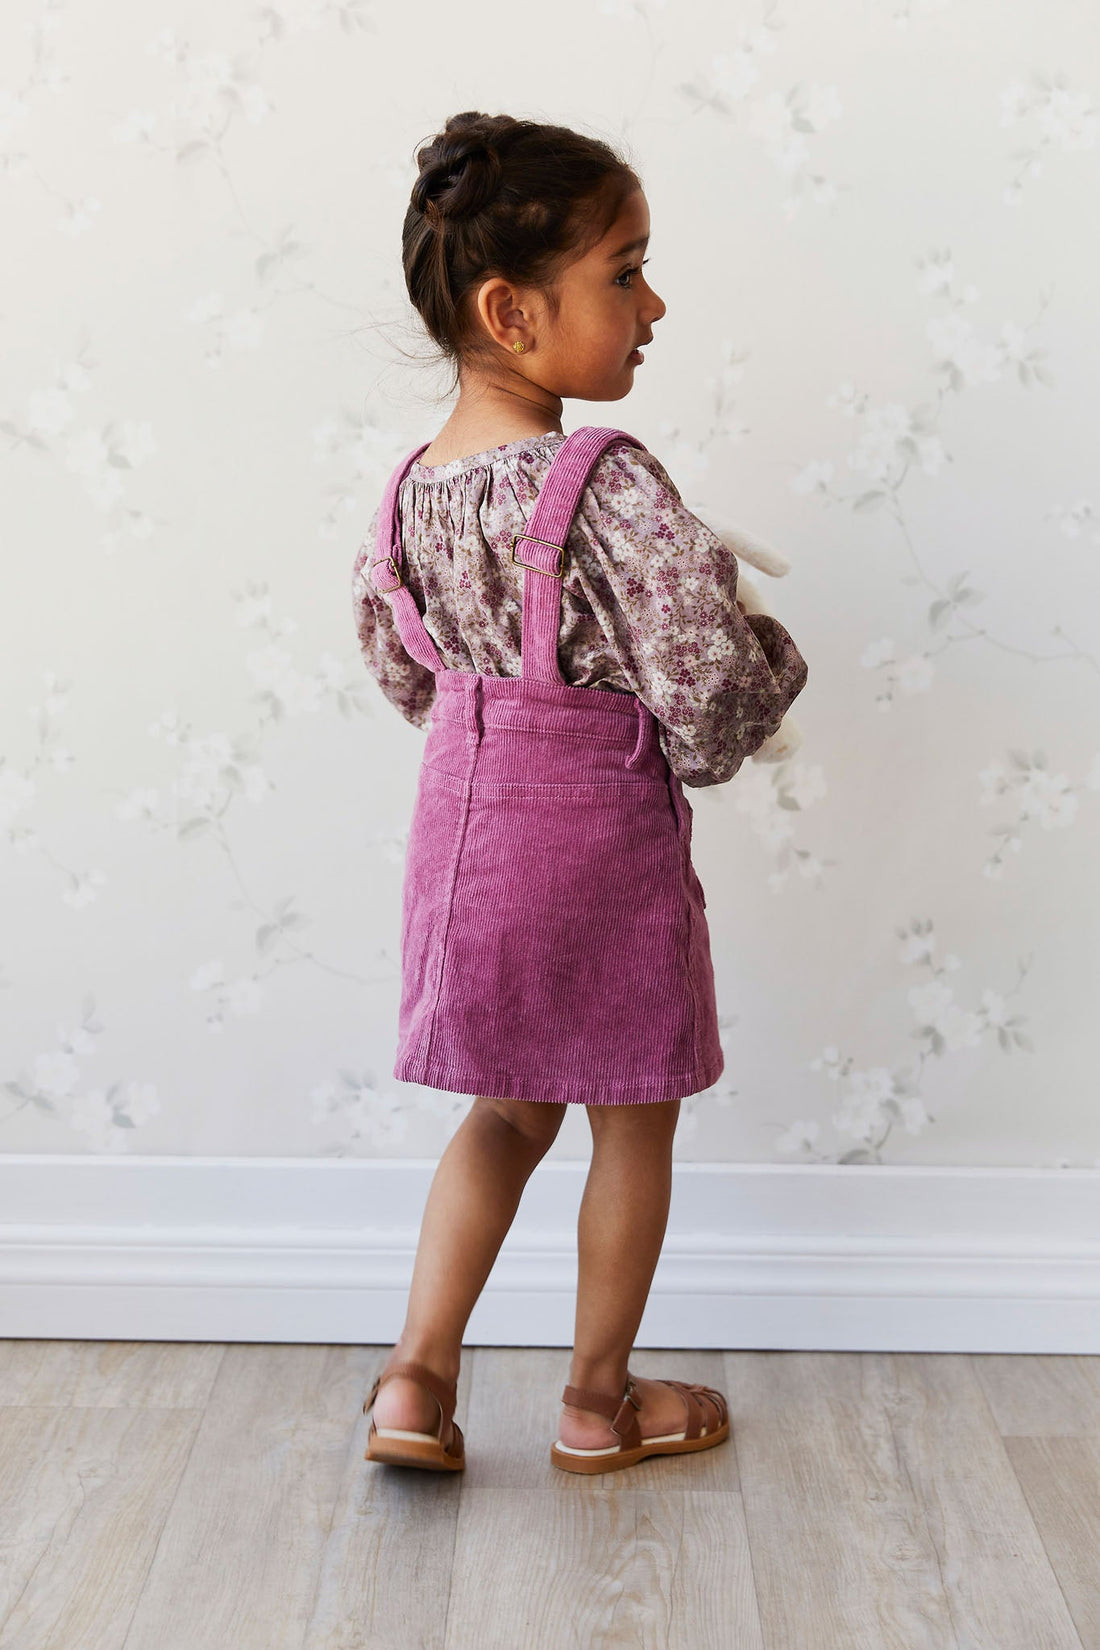 Alexis Cord Overall Dress - Dhalia Childrens Overall from Jamie Kay USA